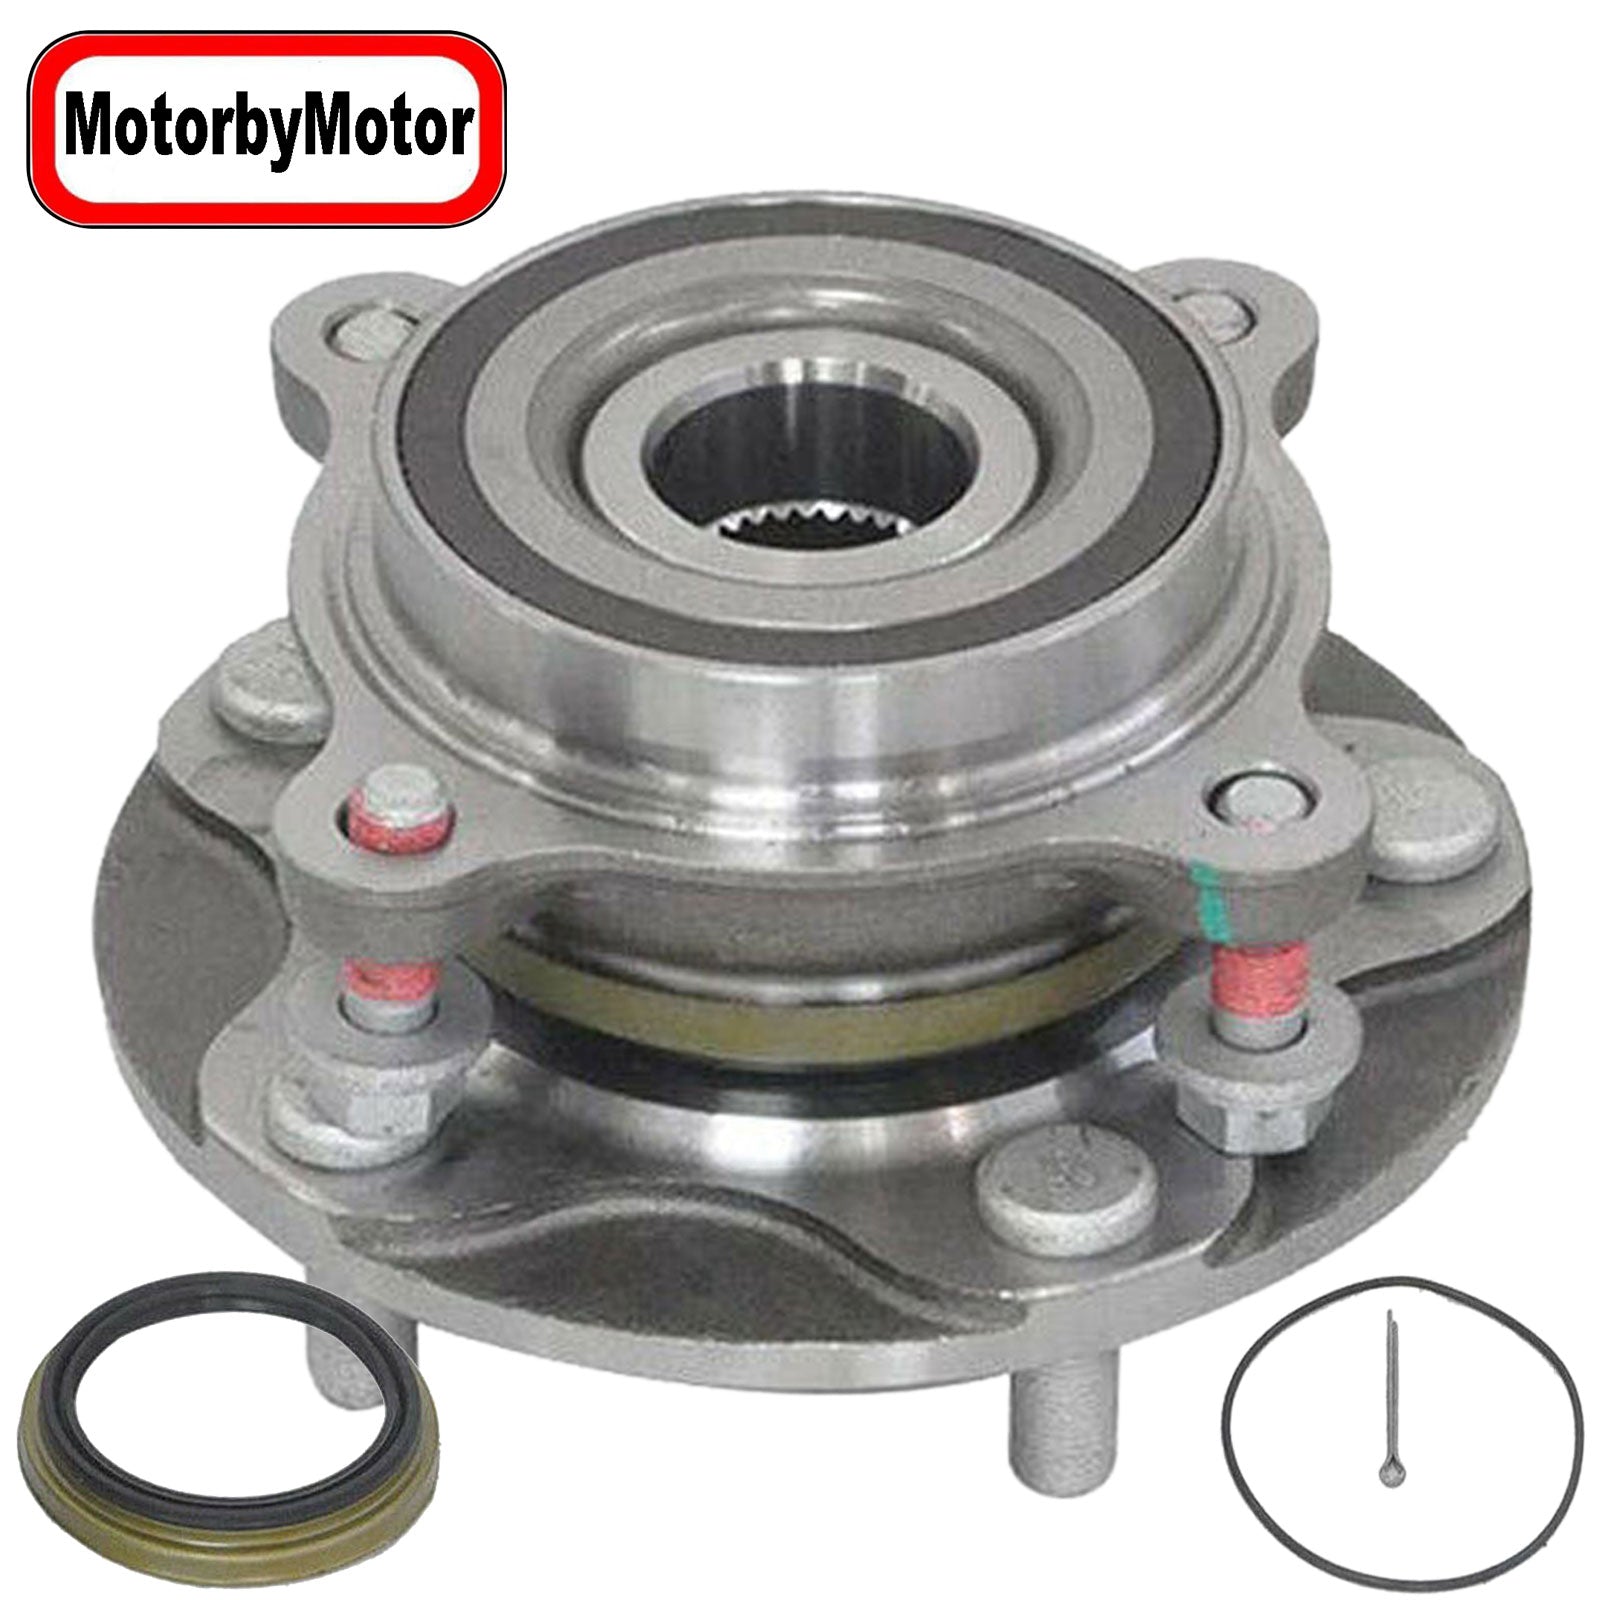 MotorbyMotor 950-002 (4WD) Front Heavy Duty Wheel Bearing Assembly with 5 Lugs Fits for 2008-2018 Toyota Sequoia, 2005-2018 Toyota Tundra Wheel Bearing and Hub Assembly (4x4) MotorbyMotor